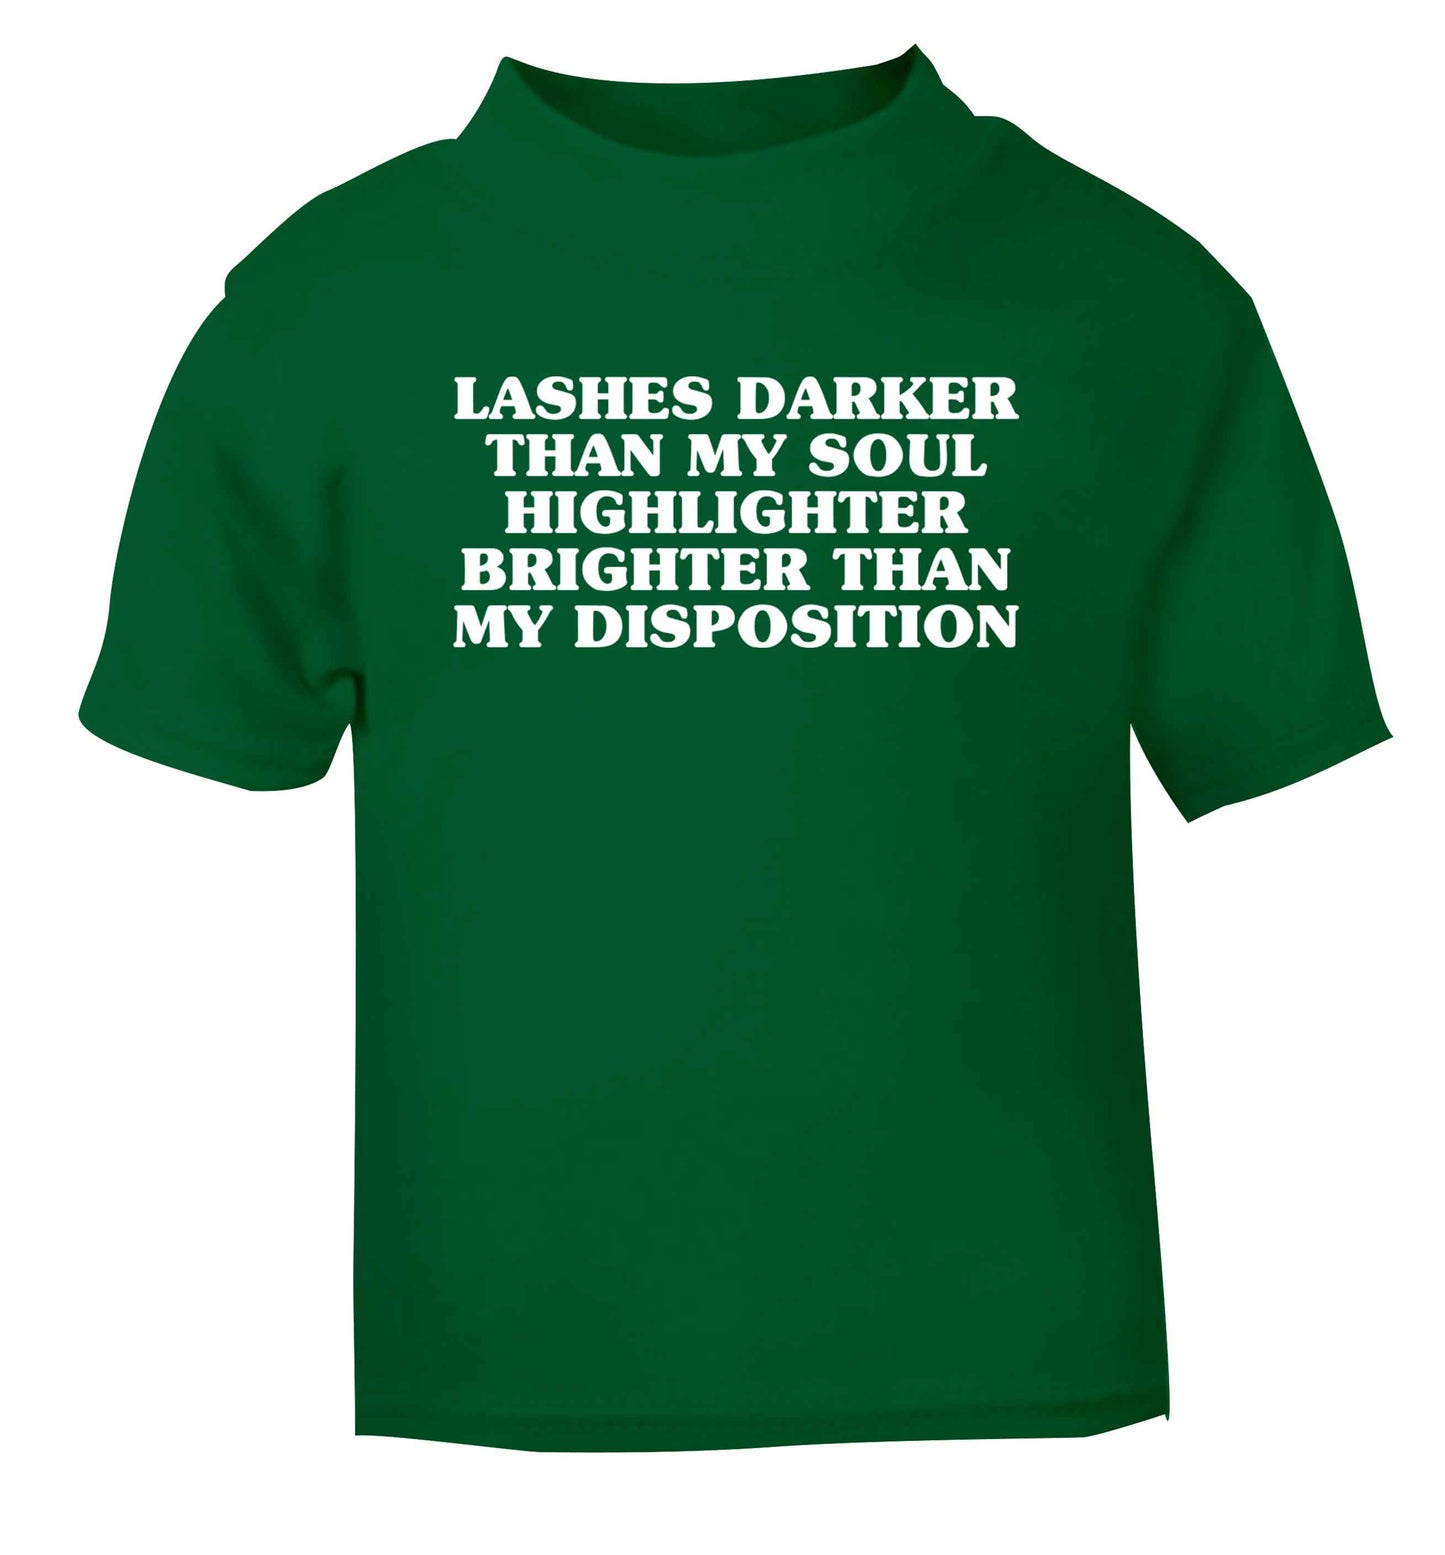 Lashes darker than my soul, highlighter brighter than my disposition green Baby Toddler Tshirt 2 Years